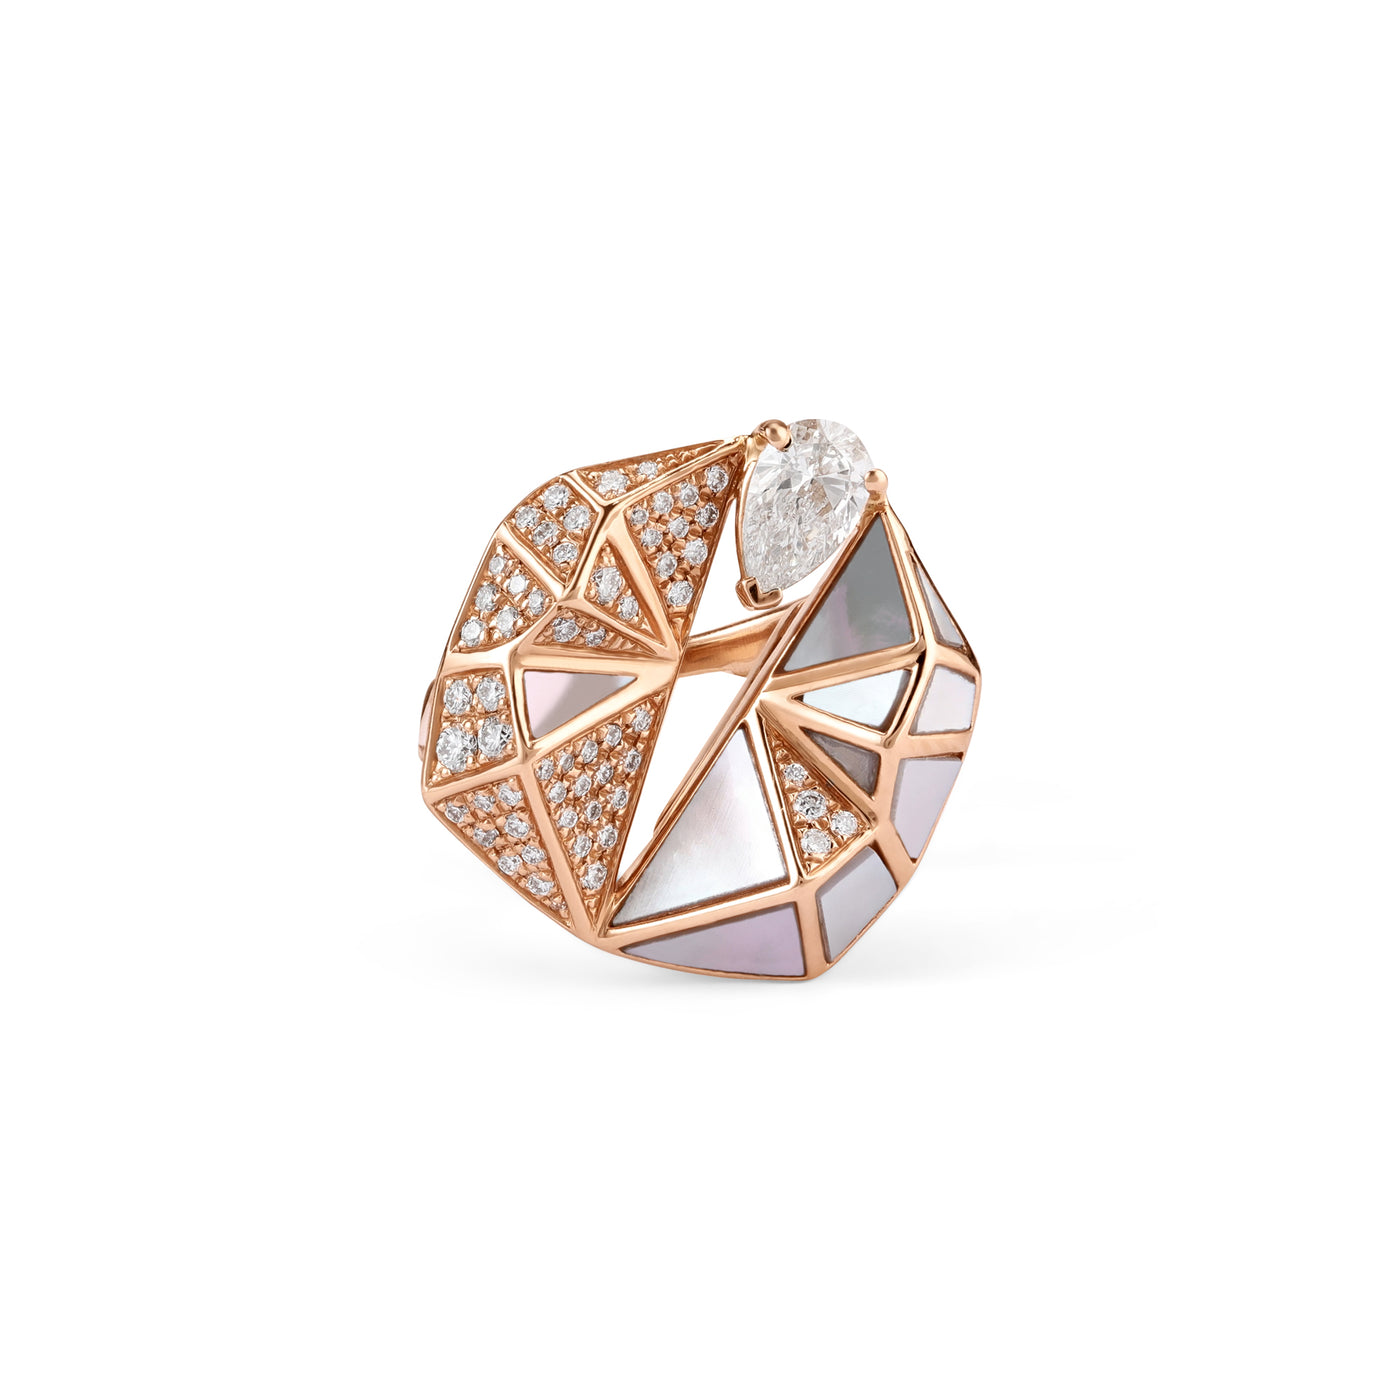 Soit Belle Geomatric Rose Gold Diamond Ring With Mop